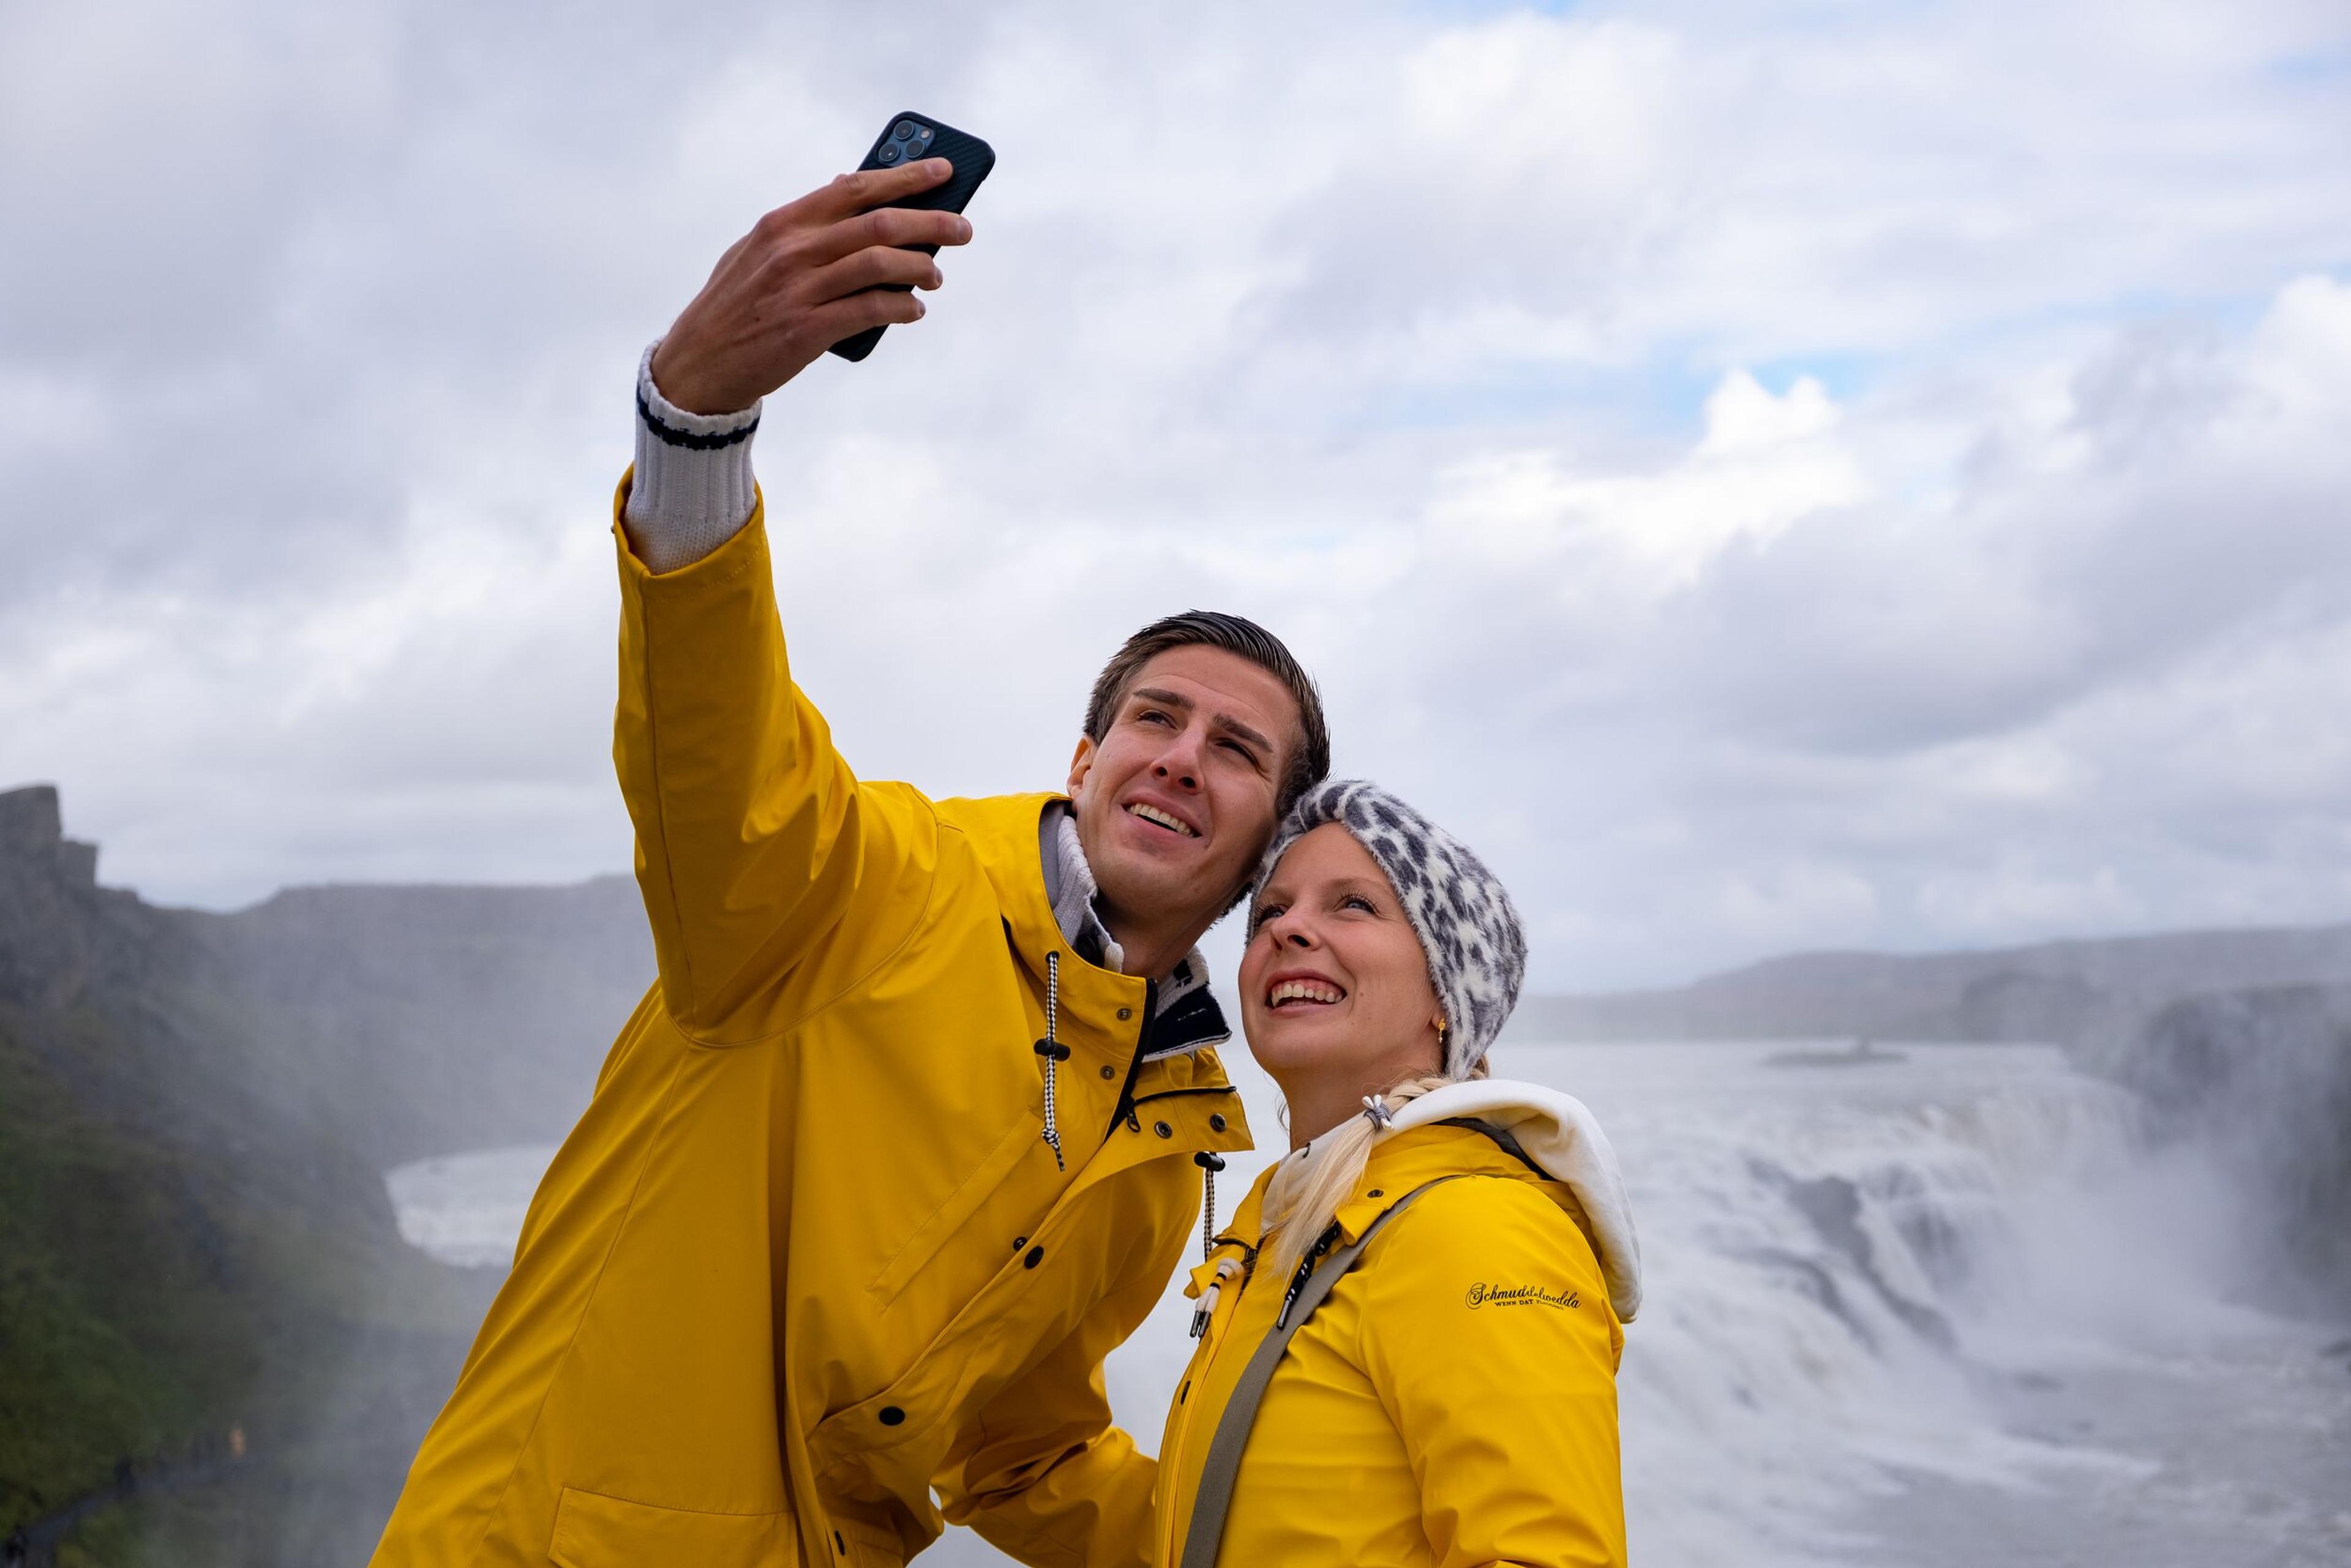 Two people in matching yellow raincoats are taking a selfie with a waterfall in the background, sharing a joyful moment in a dramatic natural setting.